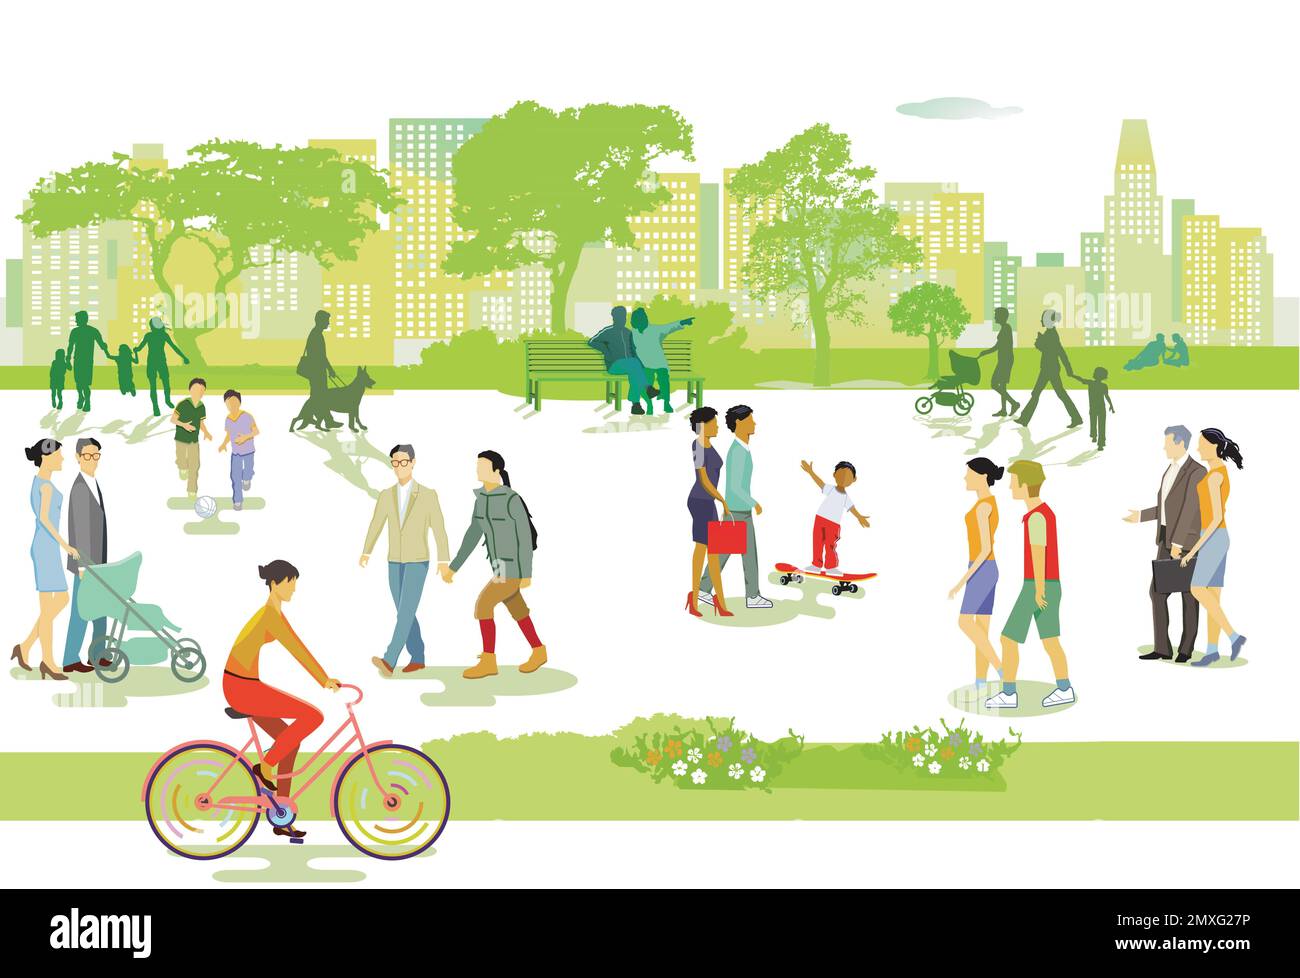 Families and people at leisure in the park, Illustration Stock Vector